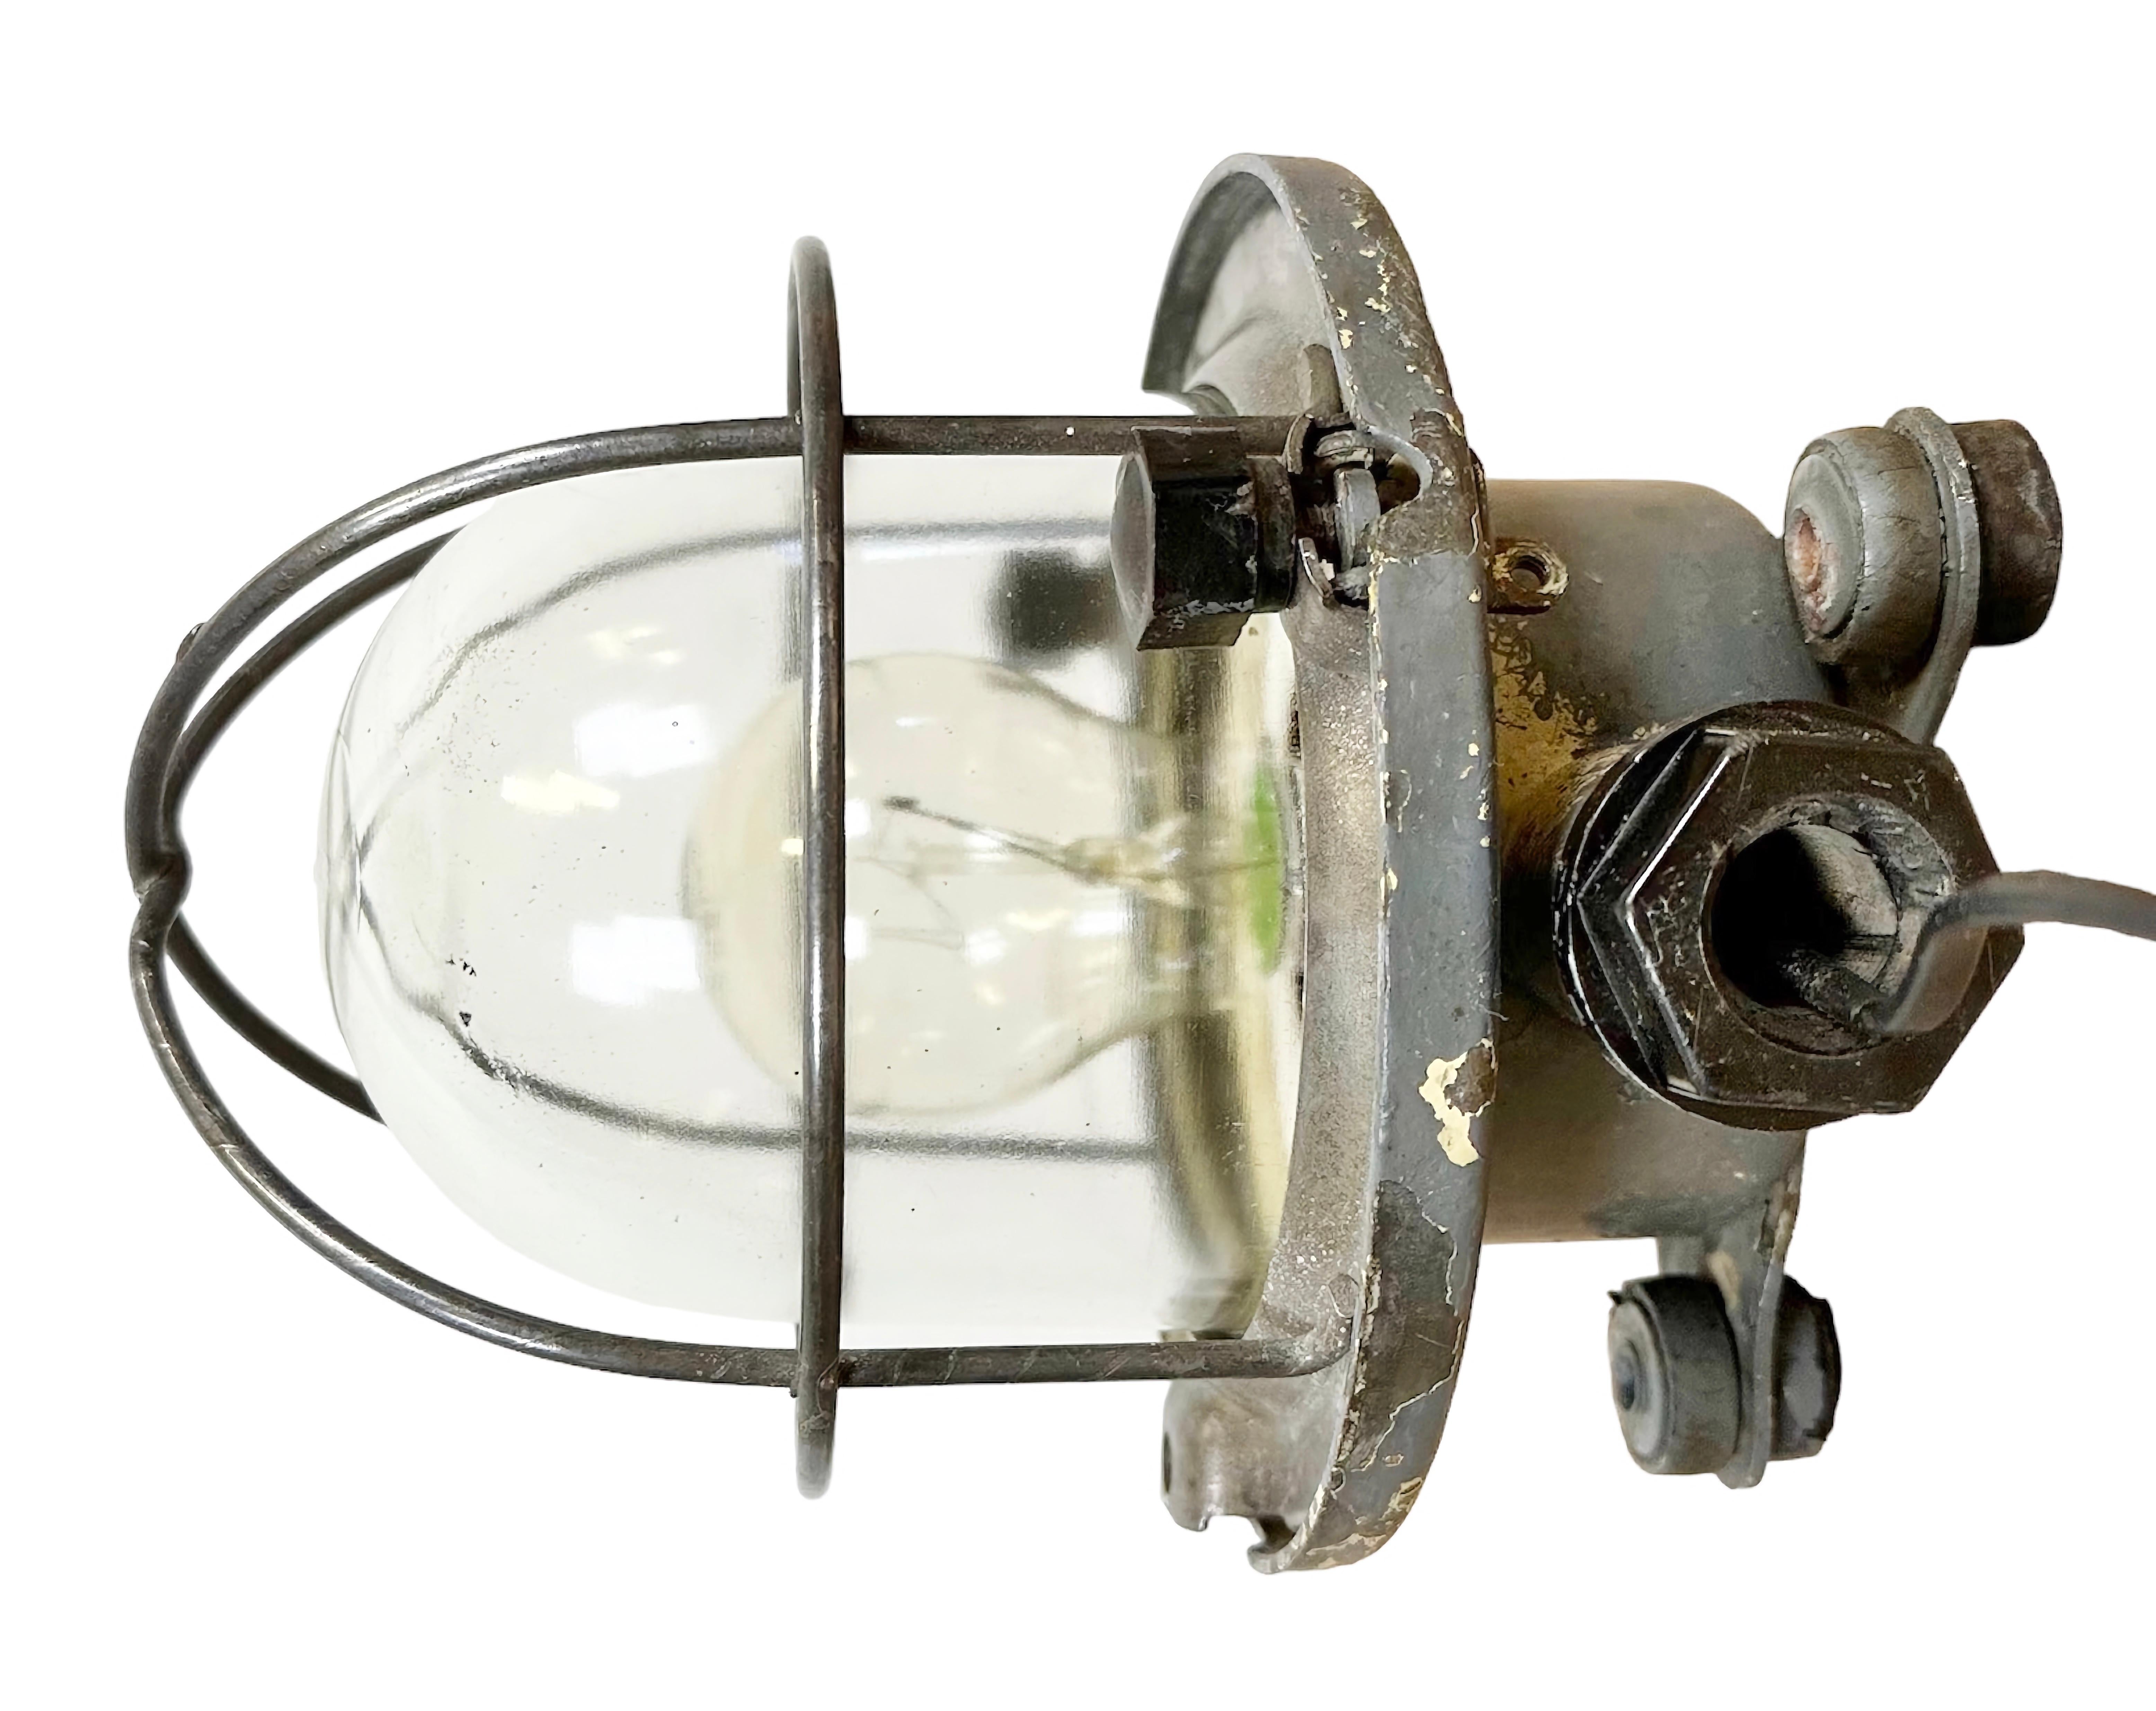 Vintage industrial celing or wall light made in former Soviet Union during the 1960s. It features a metal body with grid and a clear glass cover. The socket requires E 27/ E 26 light bulbs. New wire. The diameter of the lamp is 17cm. The weight of